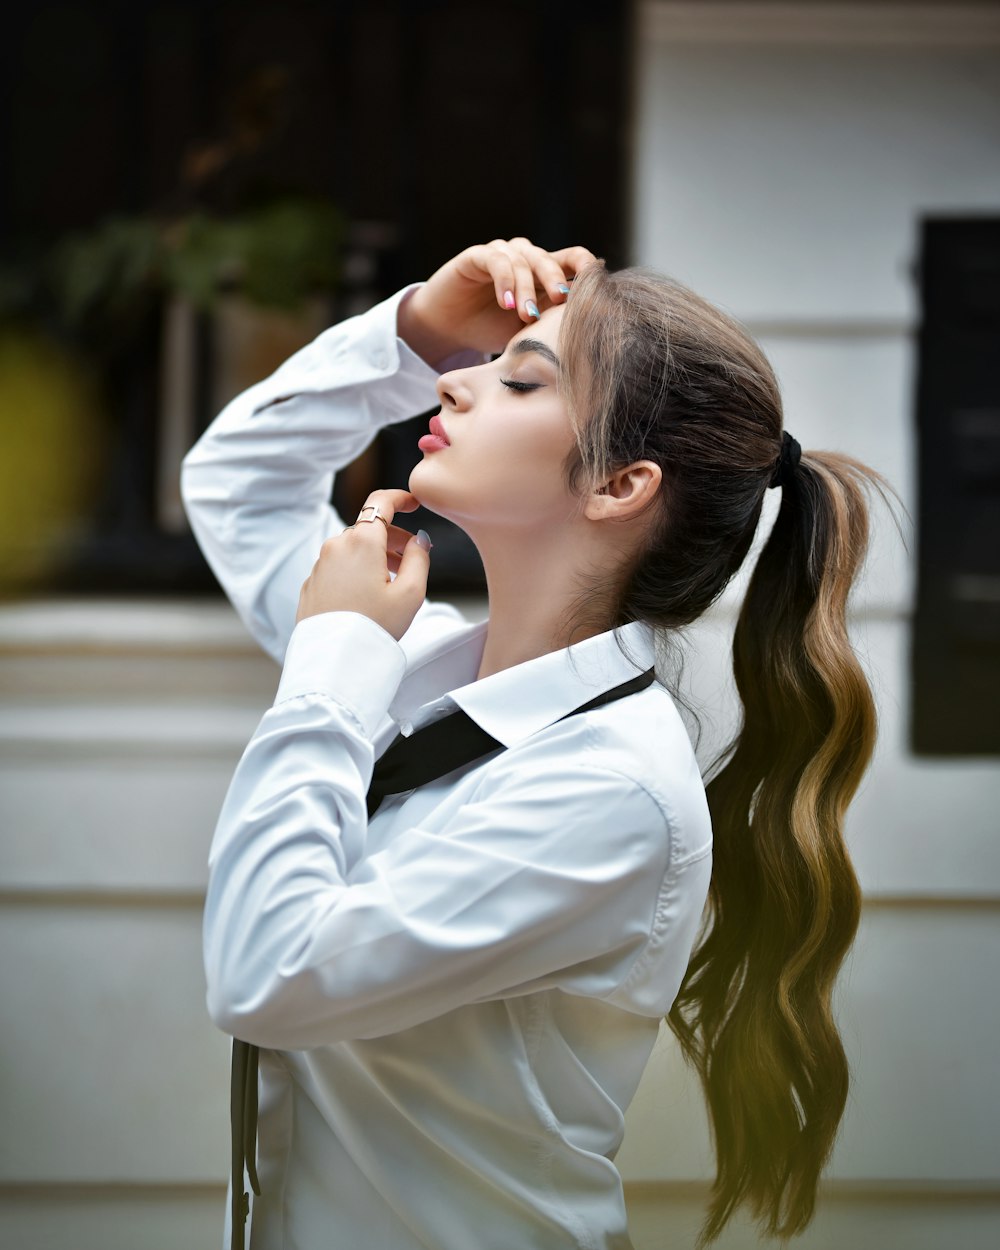 a woman with long hair wearing a white shirt and black tie